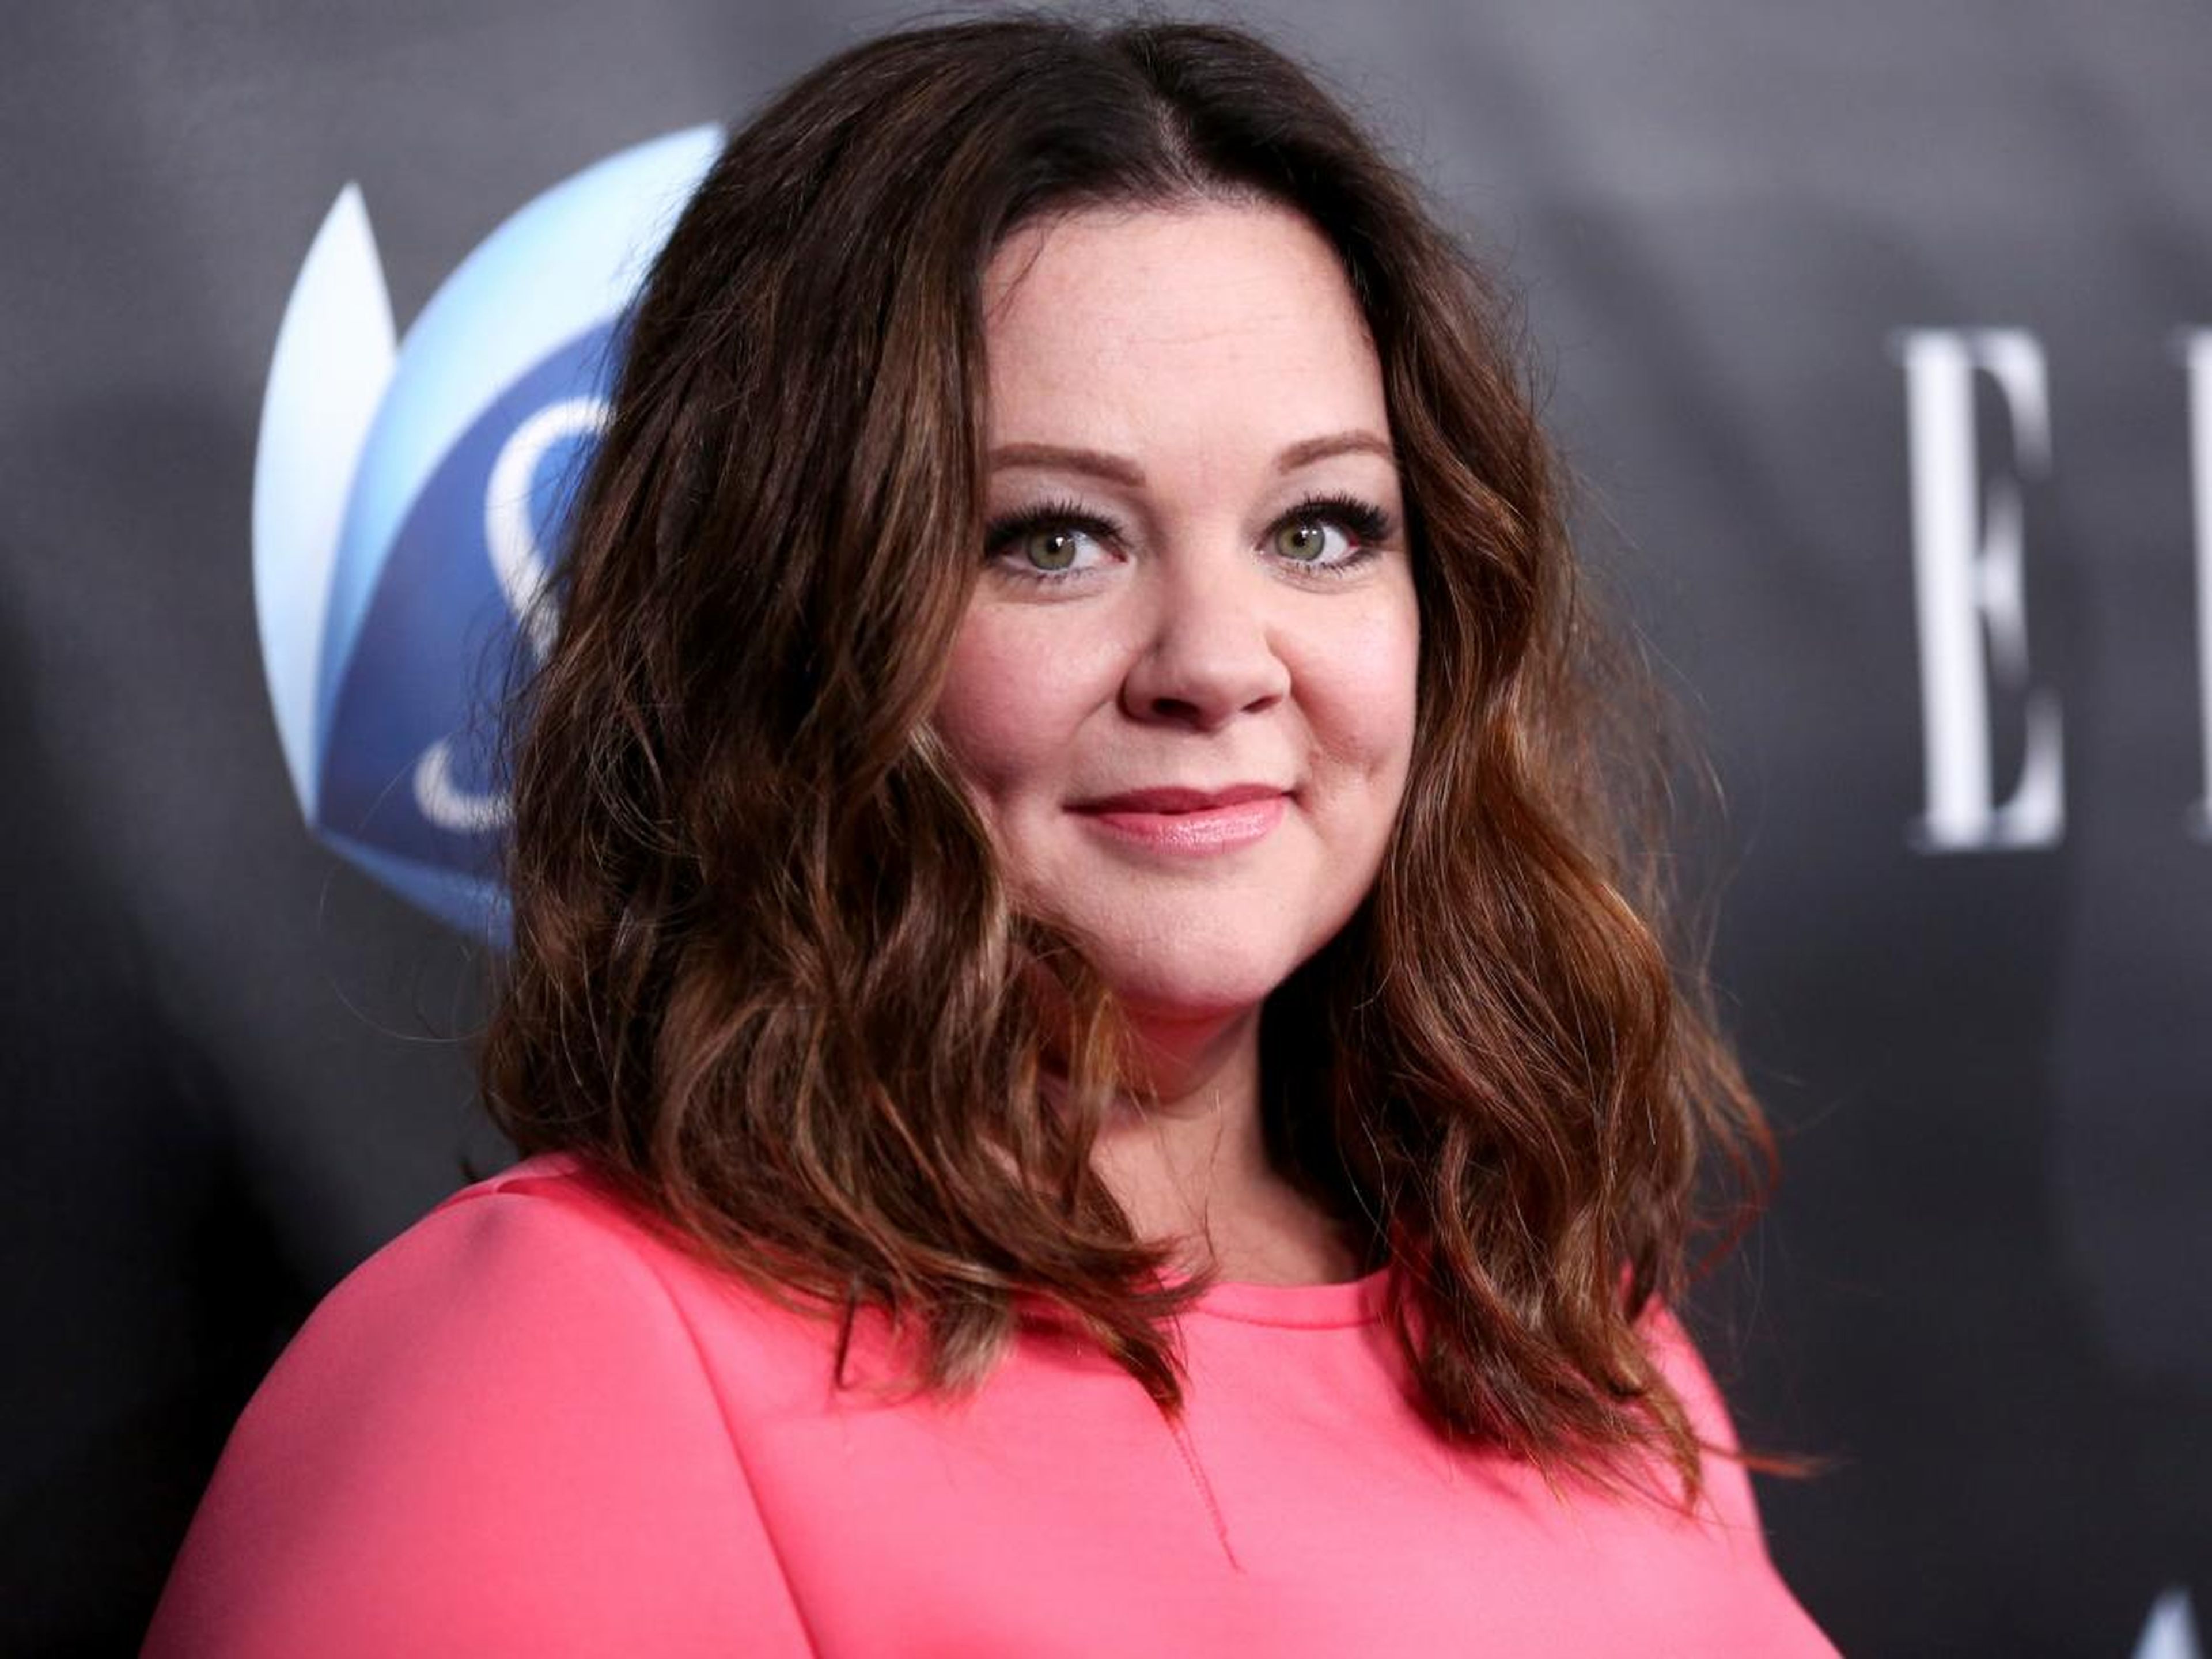 Consider celebrity Melissa McCarthy, who begins her morning reading The Los Angeles Times, National Geographic, and The New York Times.